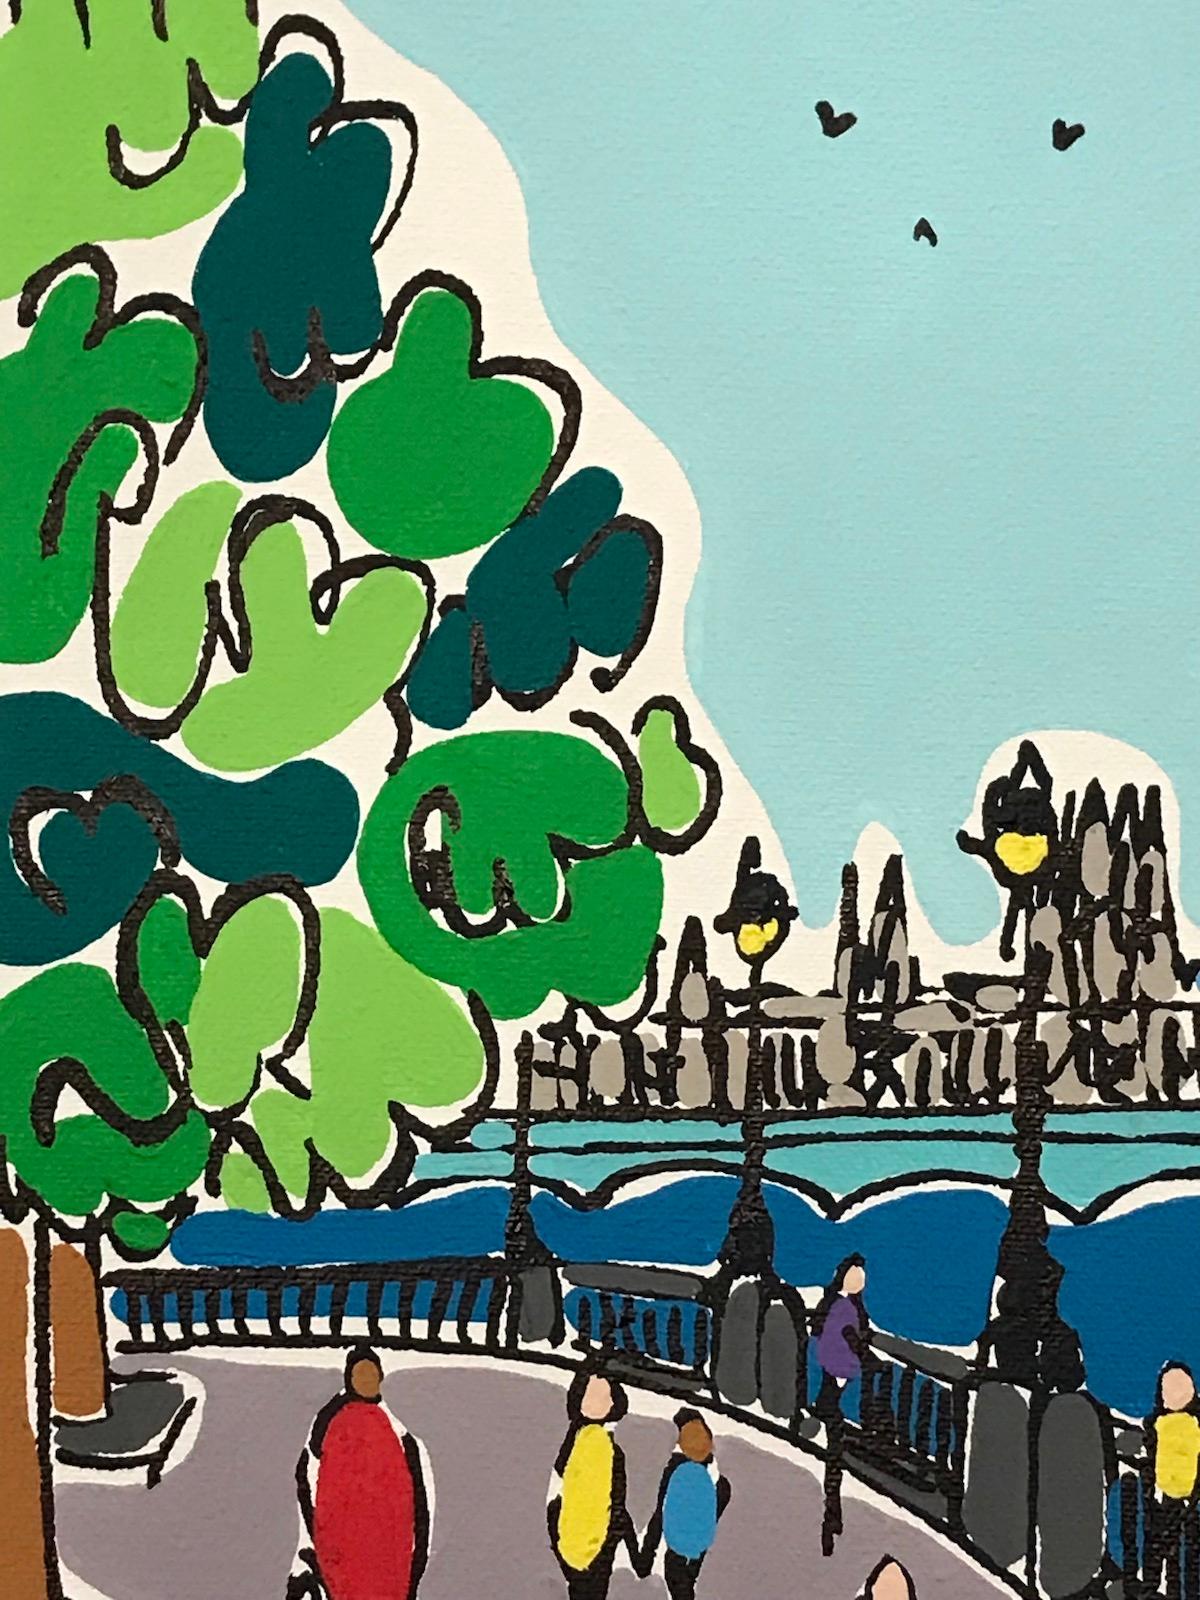 Mini London Southbank Winter By Rachel Tighe [2021]

original
Acrylic on Canvas
Image size: H:30 cm x W:25 cm
Complete Size of Unframed Work: H:30 cm x W:25 cm x D:4cm
Sold Unframed
Please note that insitu images are purely an indication of how a